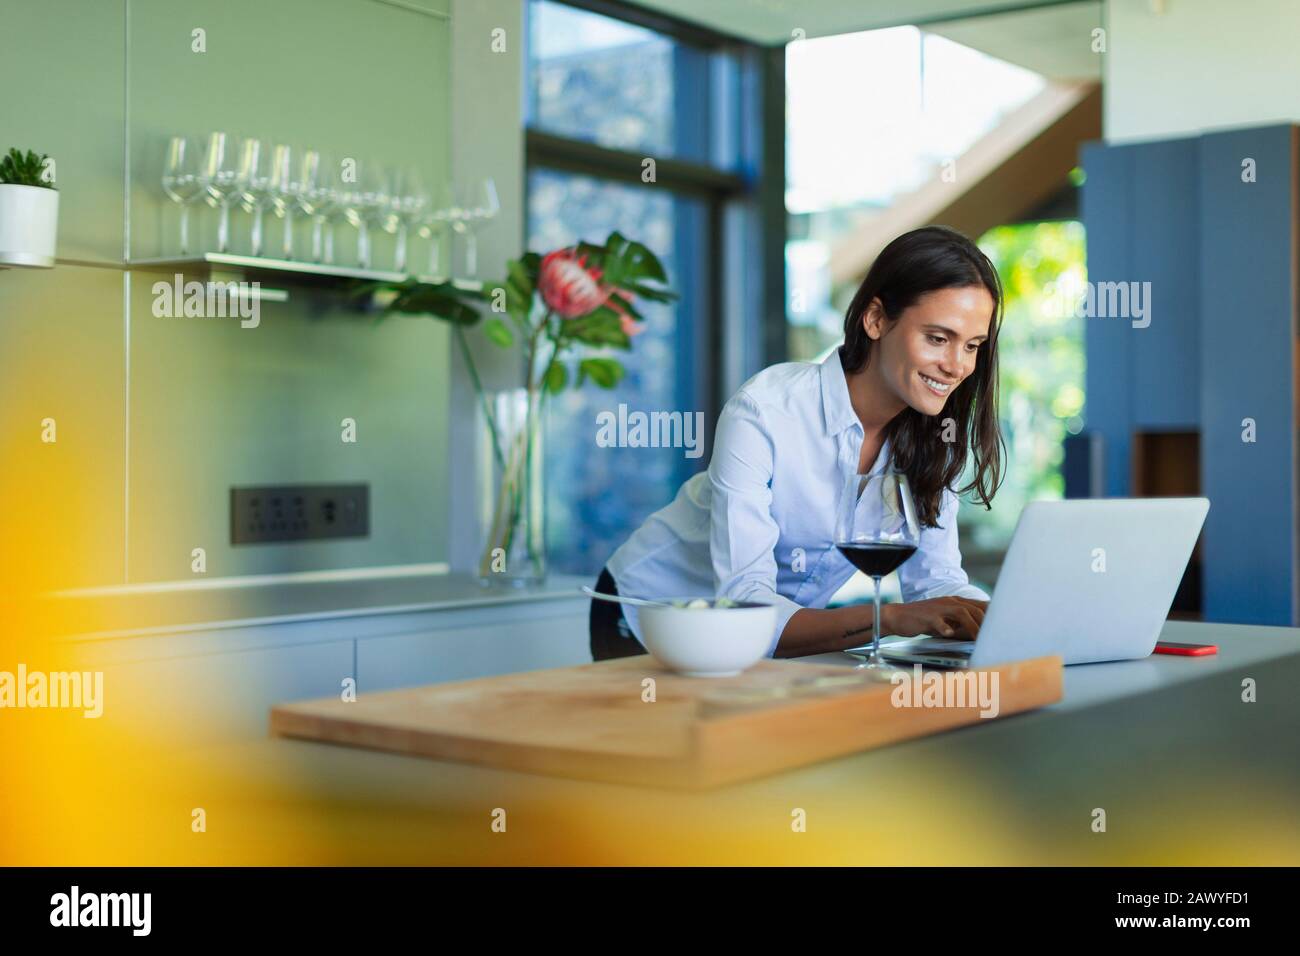 Smiling woman using laptop and drinking red wine in kitchen Stock Photo